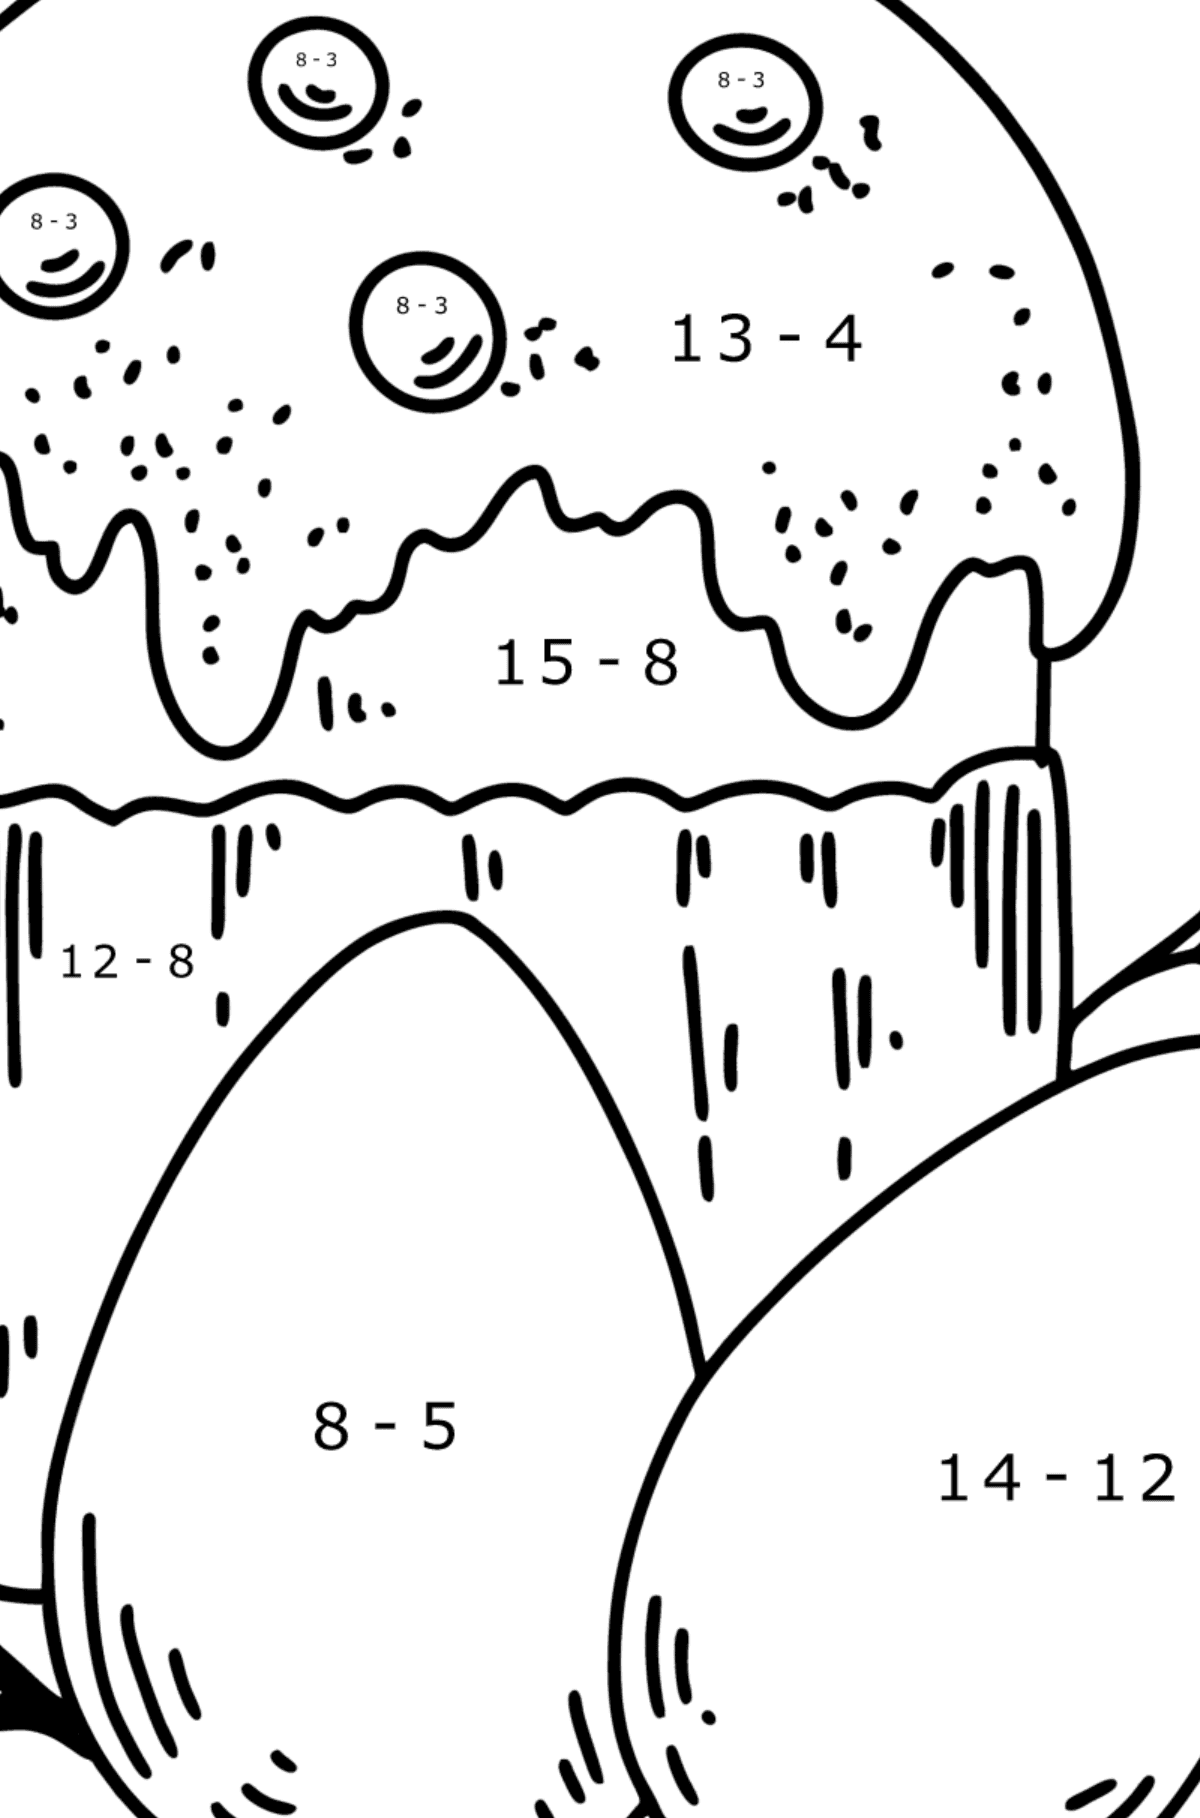 Coloring page - Easter cake and Painted Eggs - Math Coloring - Subtraction for Kids